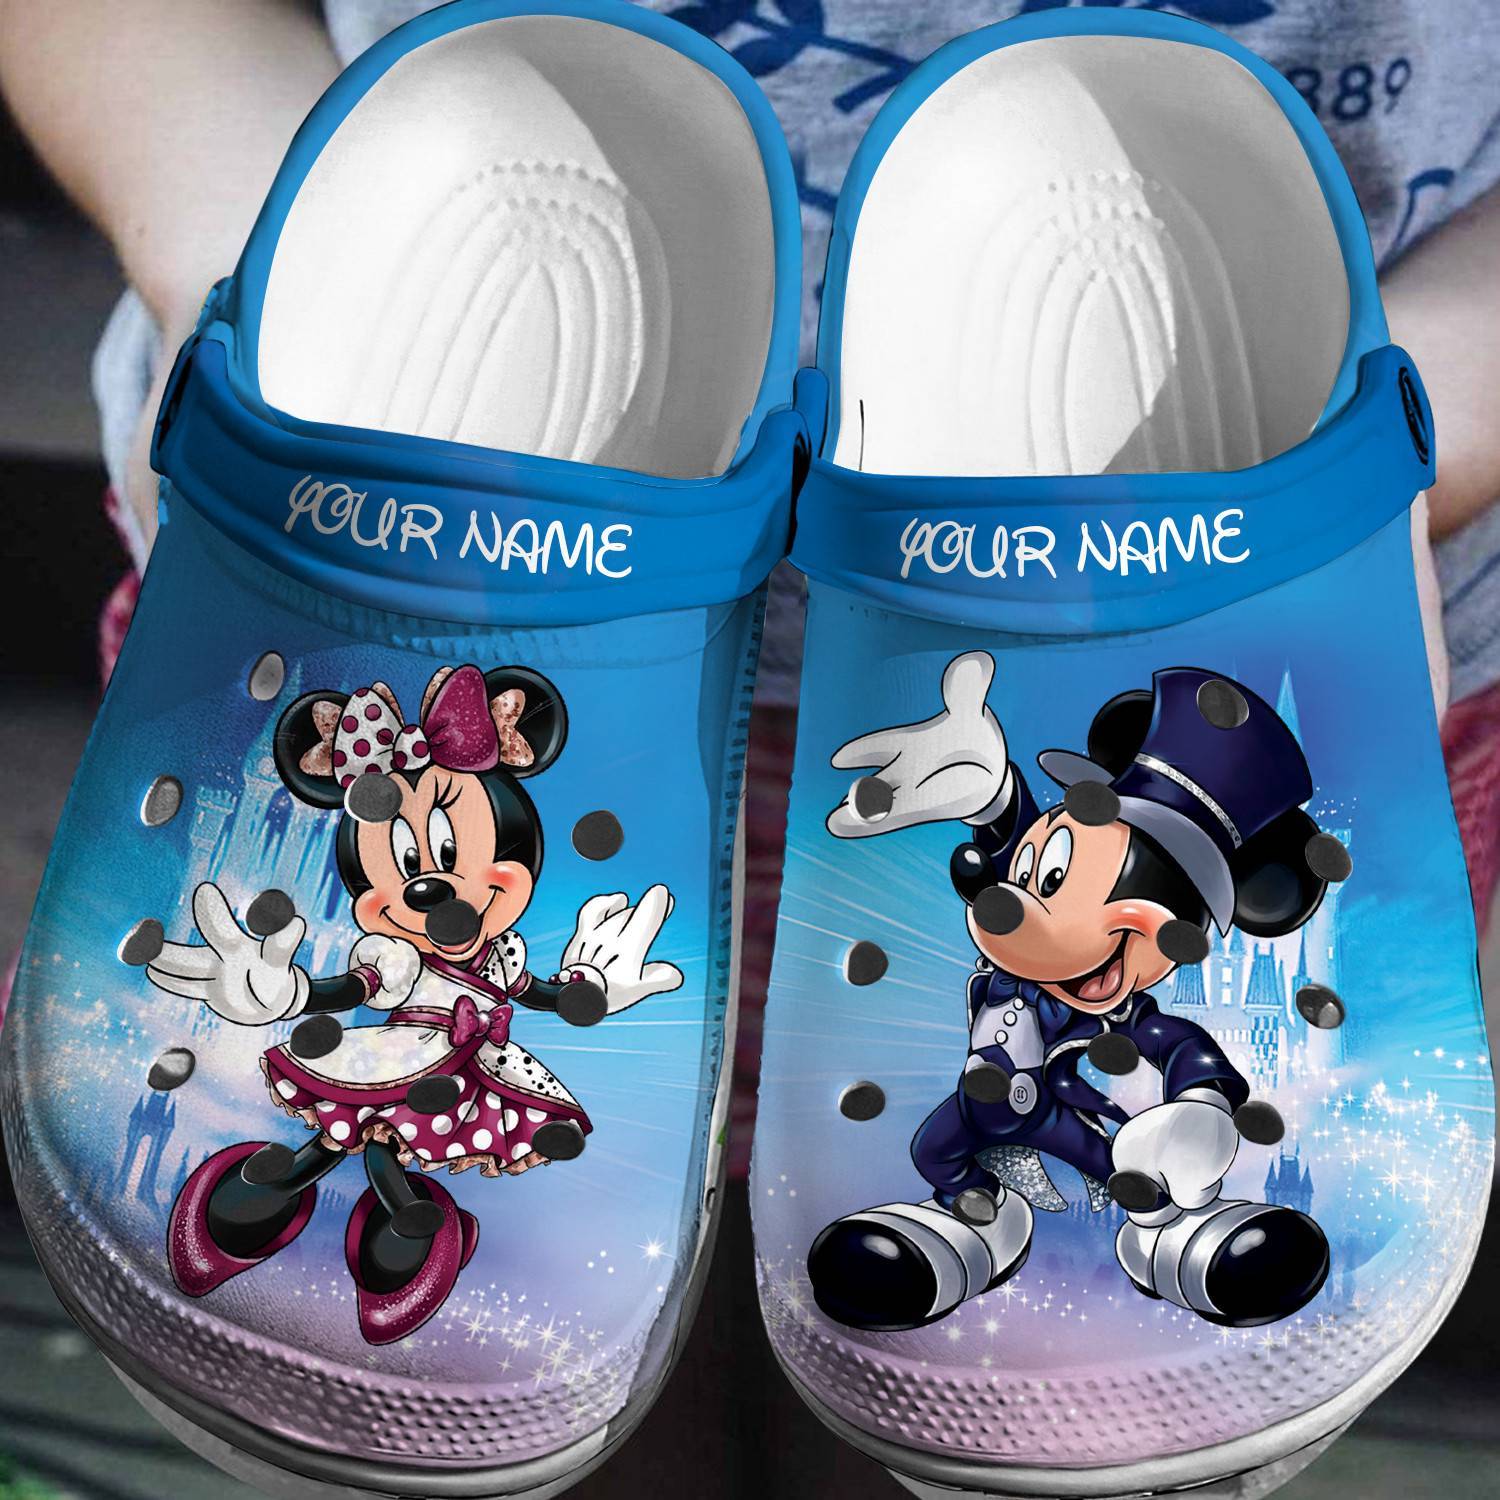 Disney Style, Personalized: Mickey Minnie Crocs 3D Clog Shoes